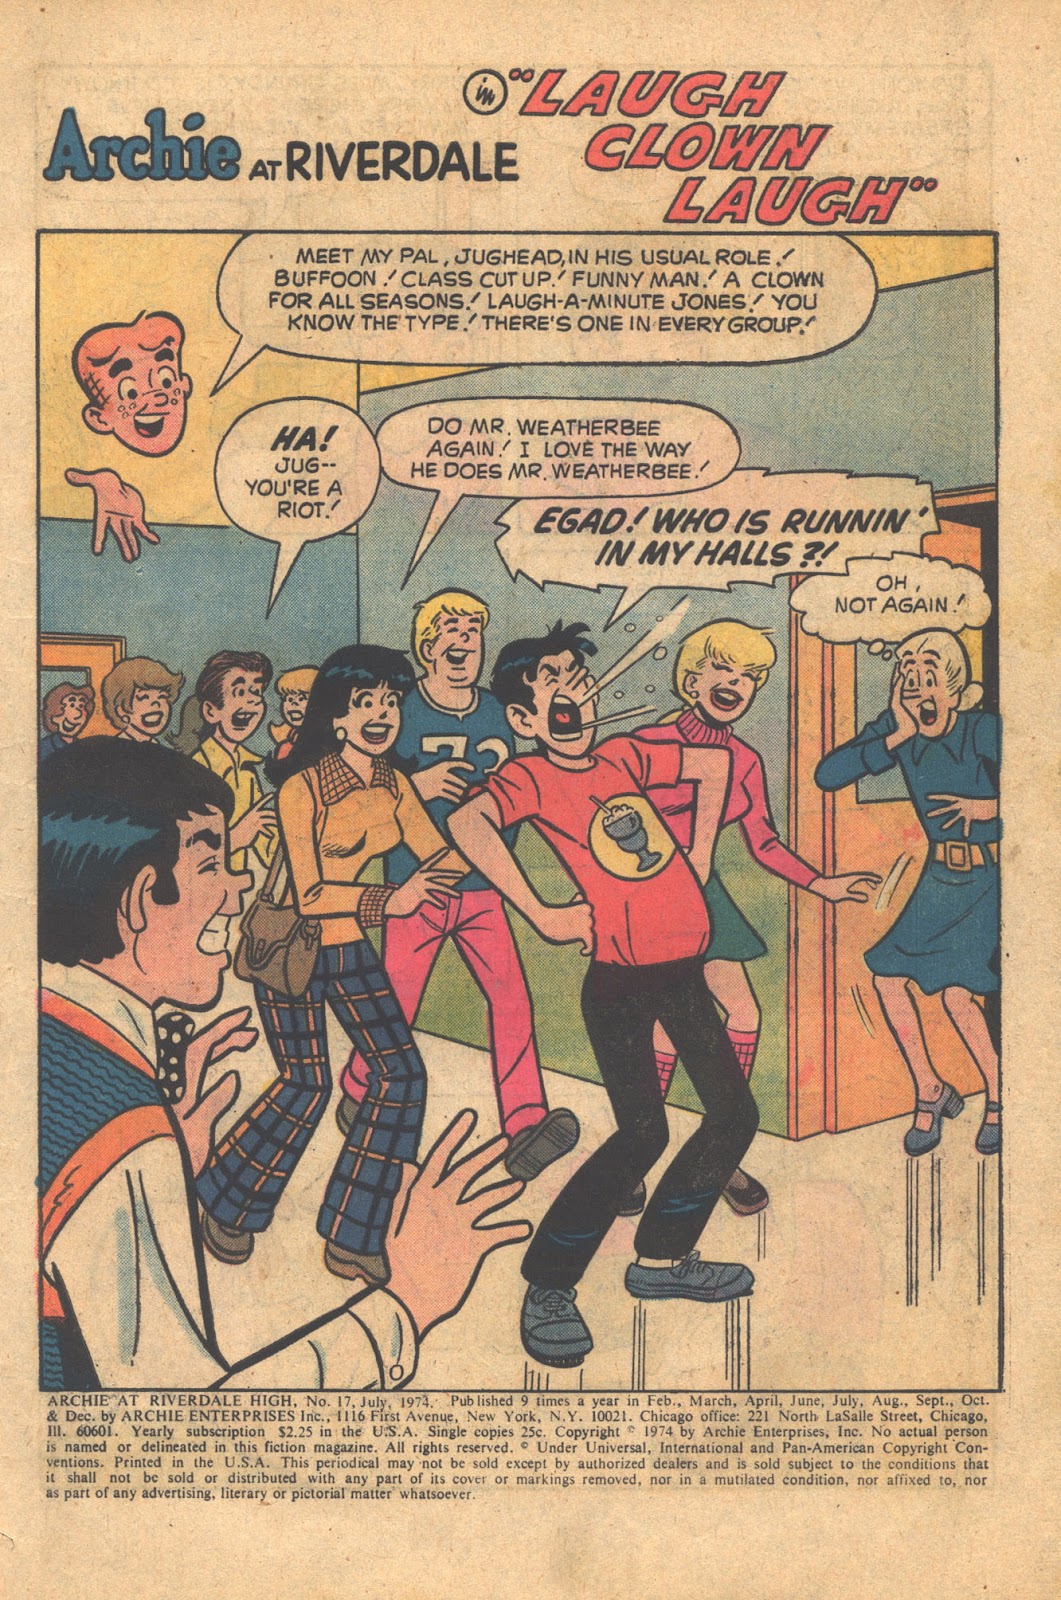 Archie at Riverdale High (1972) 17 Page 3